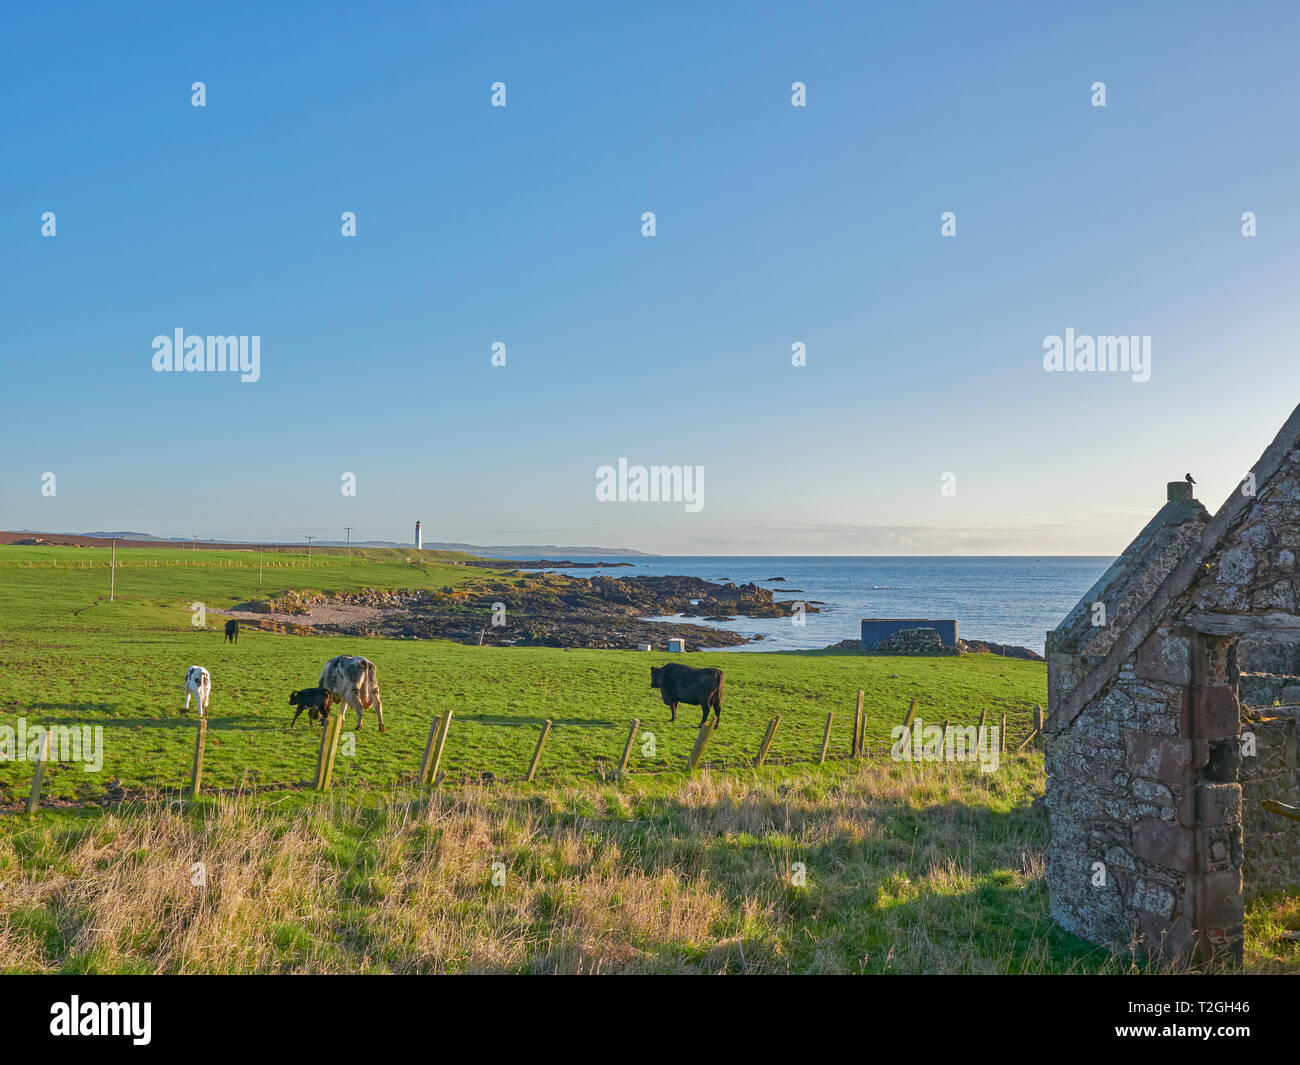 Cattle Grazing in a Field near to Scurdie Ness Lighthouse on the East Coast of Scotland, with a Farm ruin in the foreground. Montrose, Scotland. Stock Photo